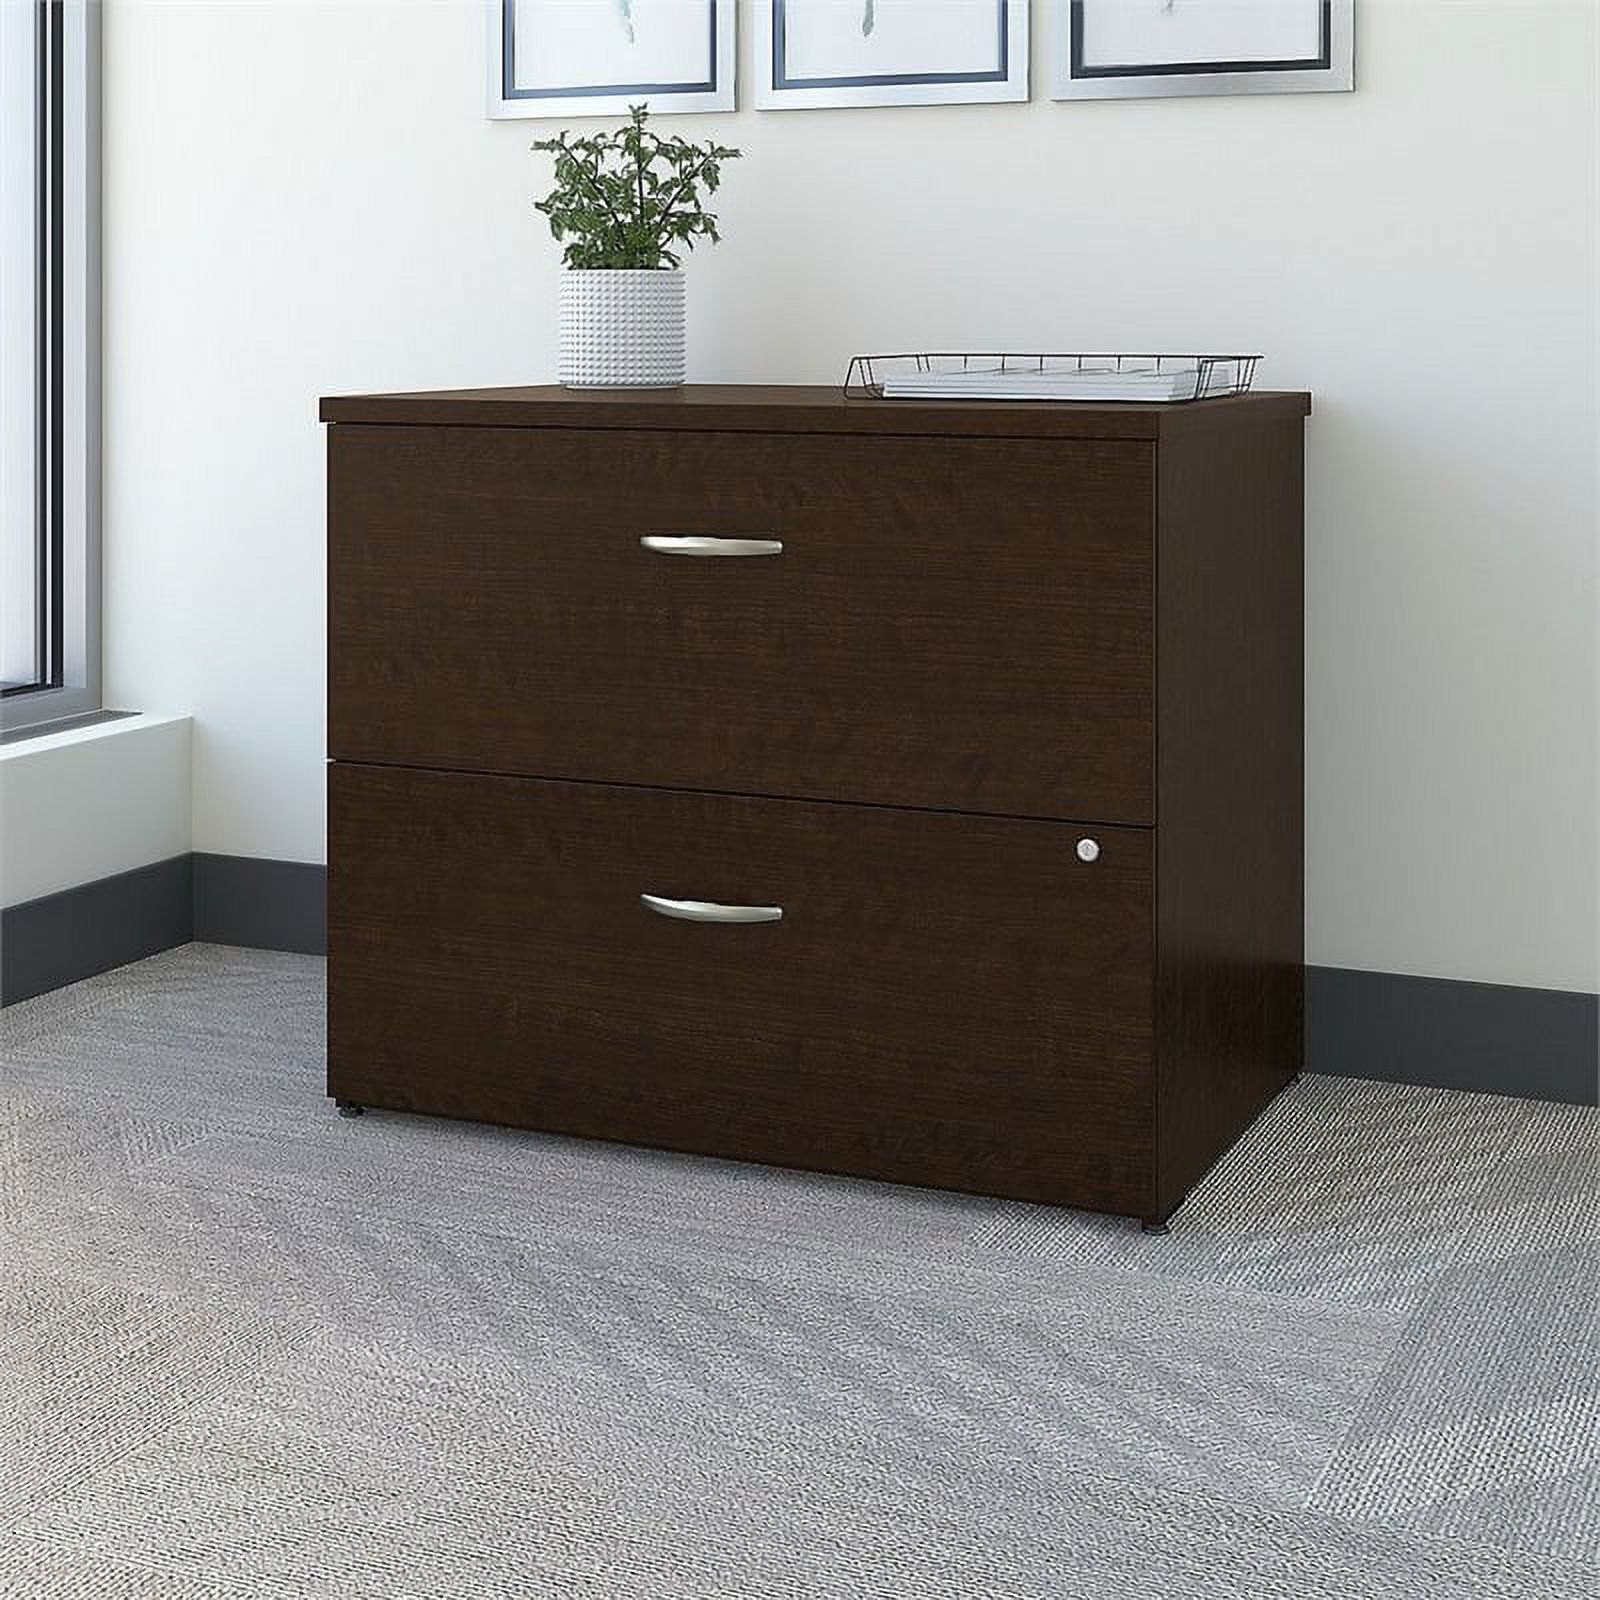 Home Square 2 Piece Wood Filing Cabinet Set with 2 Drawer in Mocha Cherry - image 3 of 9